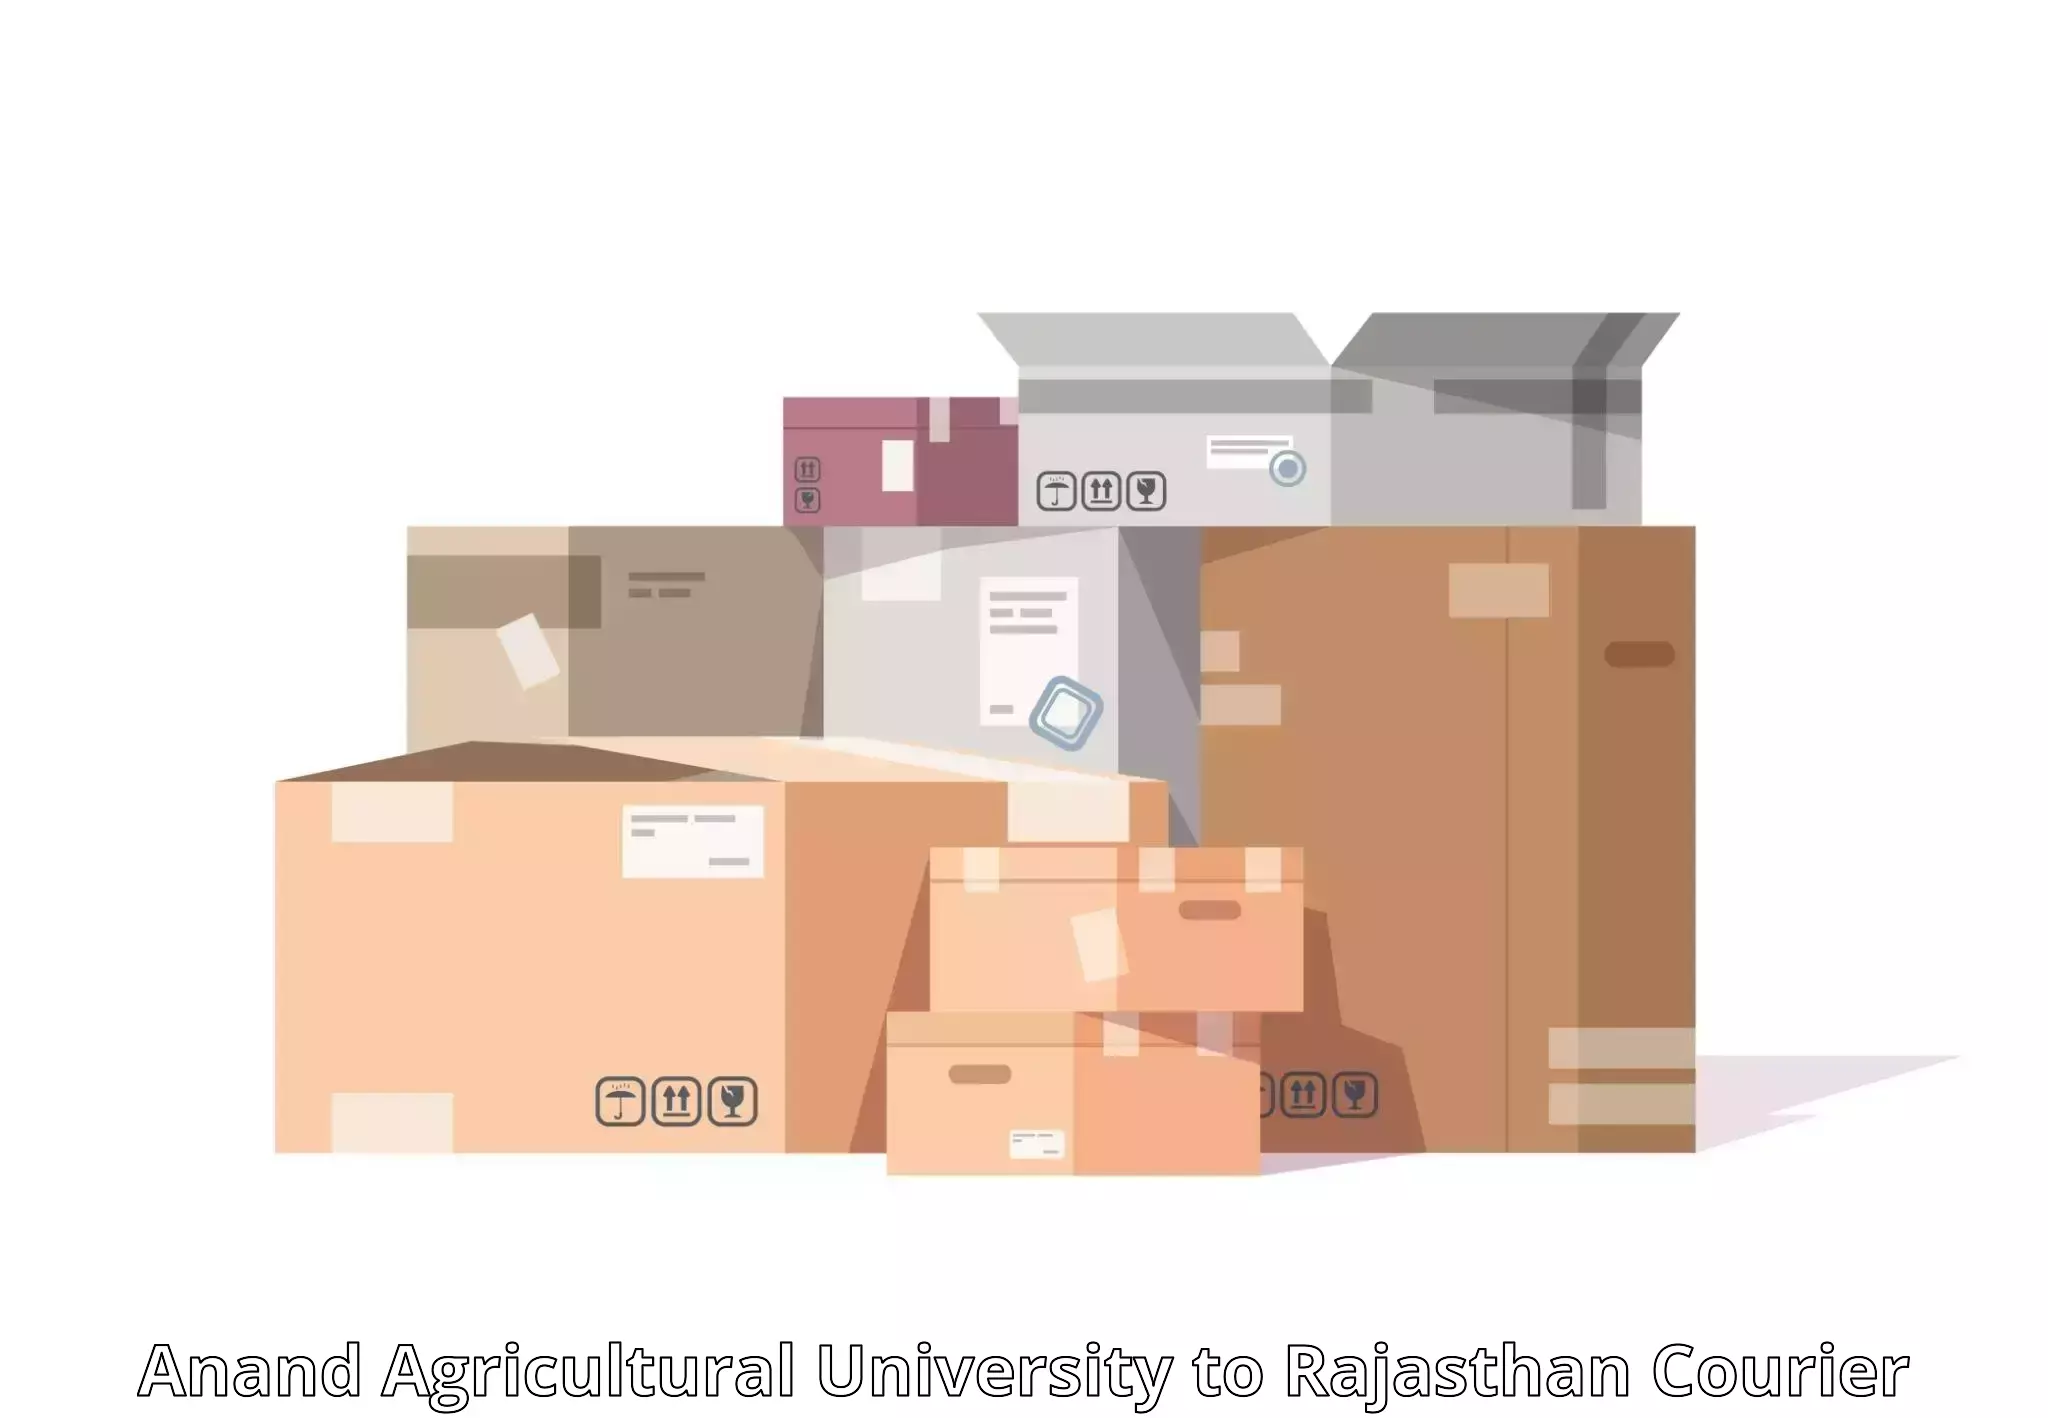 Express mail service Anand Agricultural University to Jaisalmer